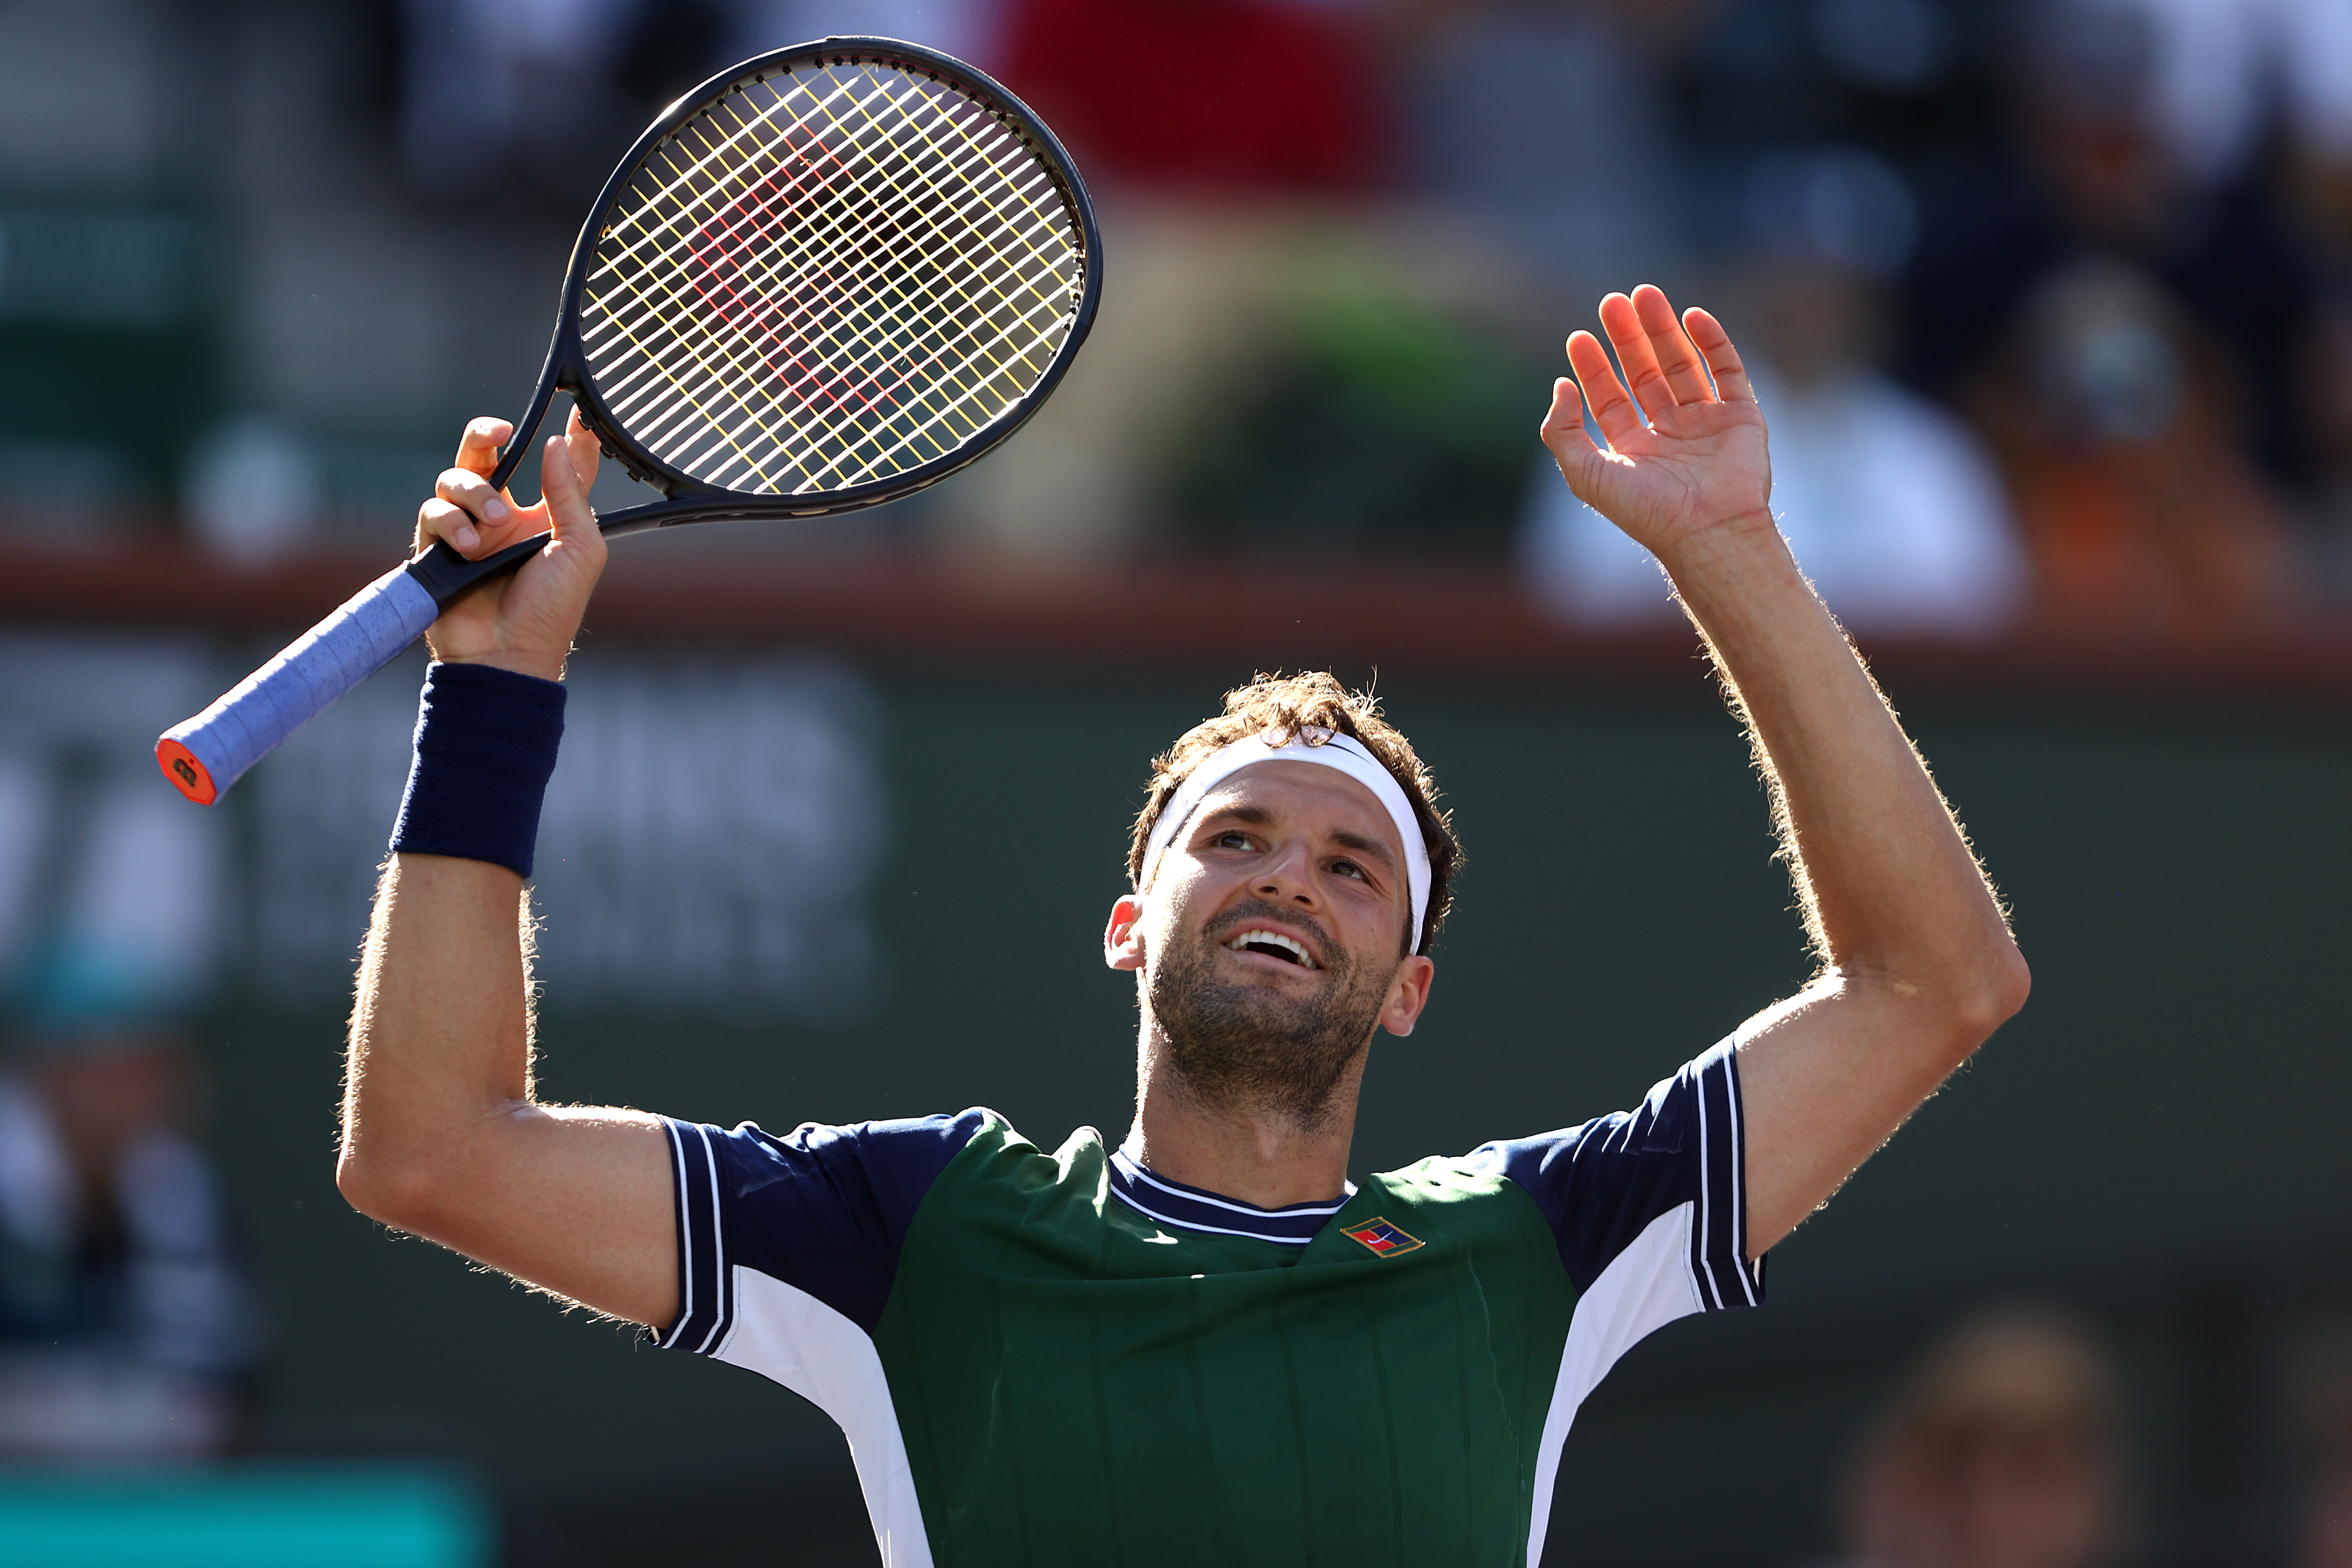 Good karma for Grigor Dimitrov The Bulgarian helps ball girl and comes up big at Indian Wells